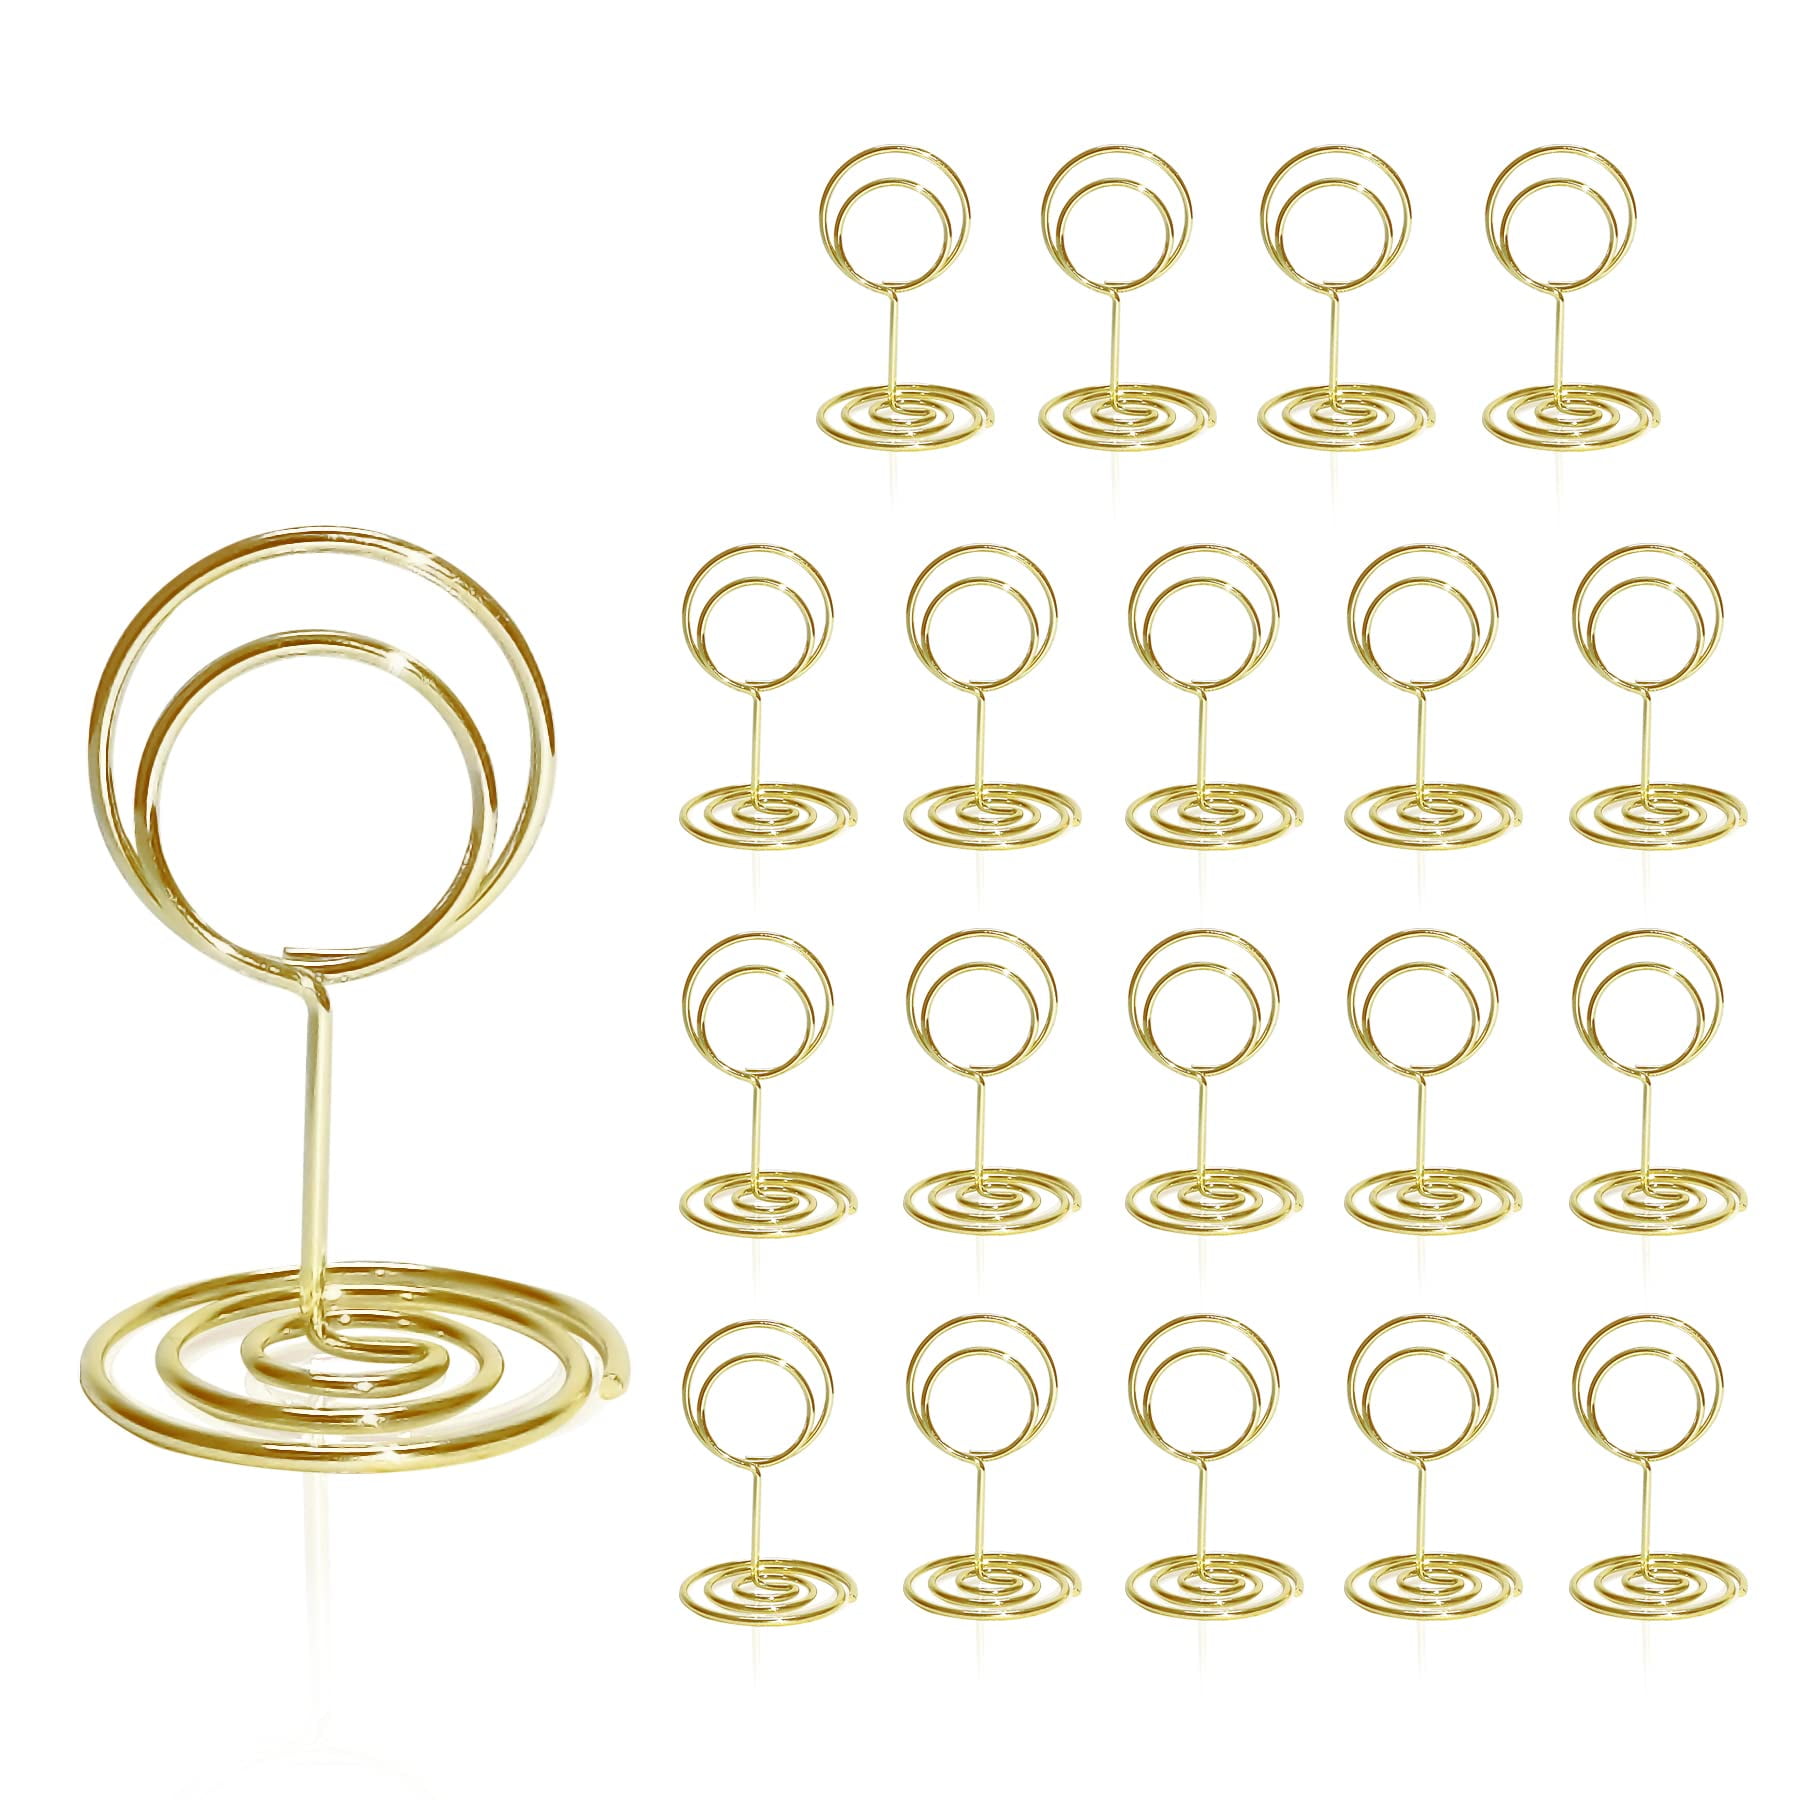 Gold Jofefe 20pcs Mini Place Card Holders Table Number Stand Table Card Holder Wire Table Picture Photo Holder with Heart Shape Menu Memo Clips for Wedding Favors 